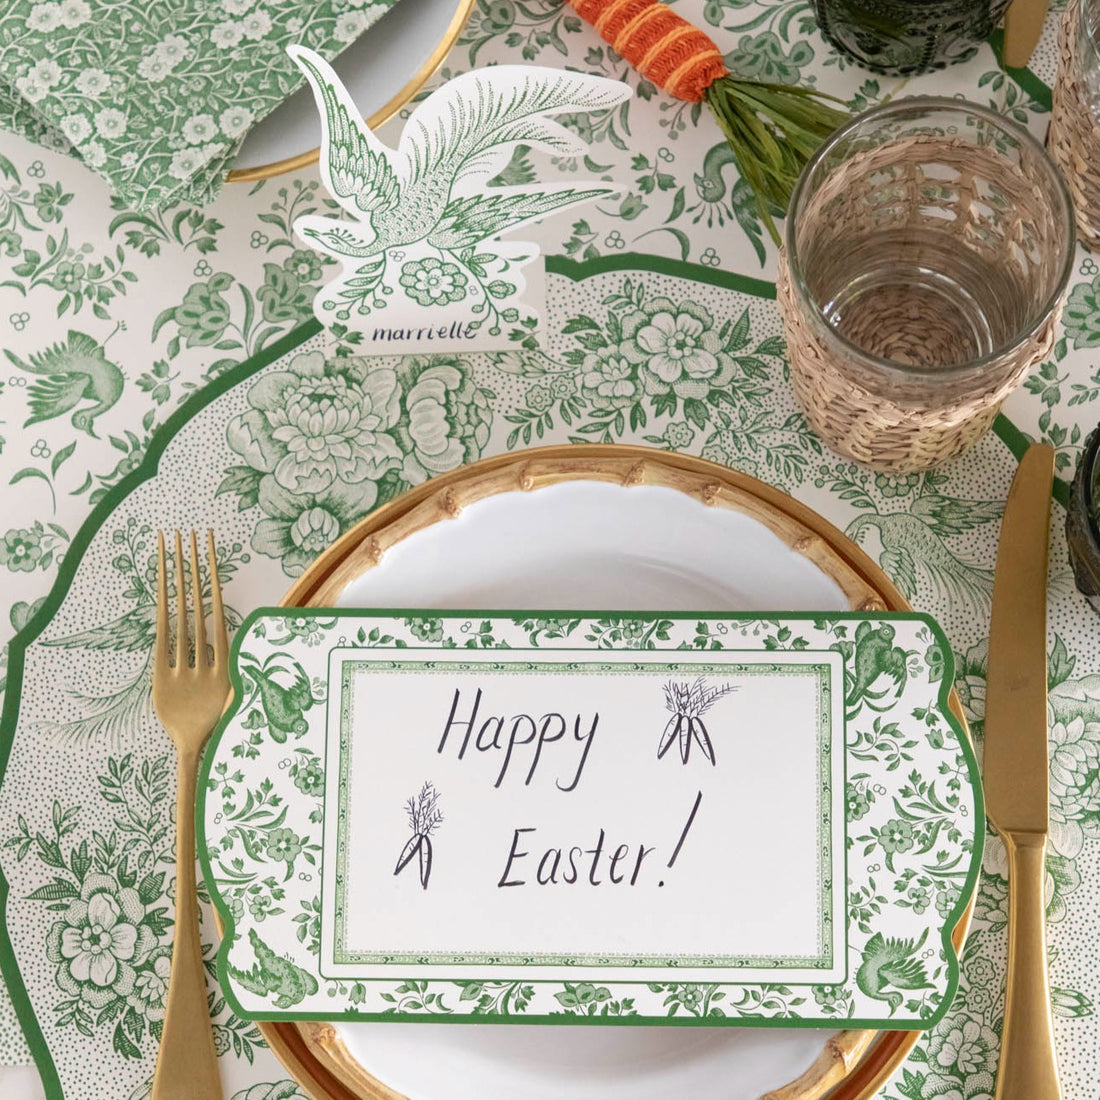 A Hester &amp; Cook Green Regal Peacock Table Card with &quot;Happy Easter!&quot; written on it in cursive resting on a plate.